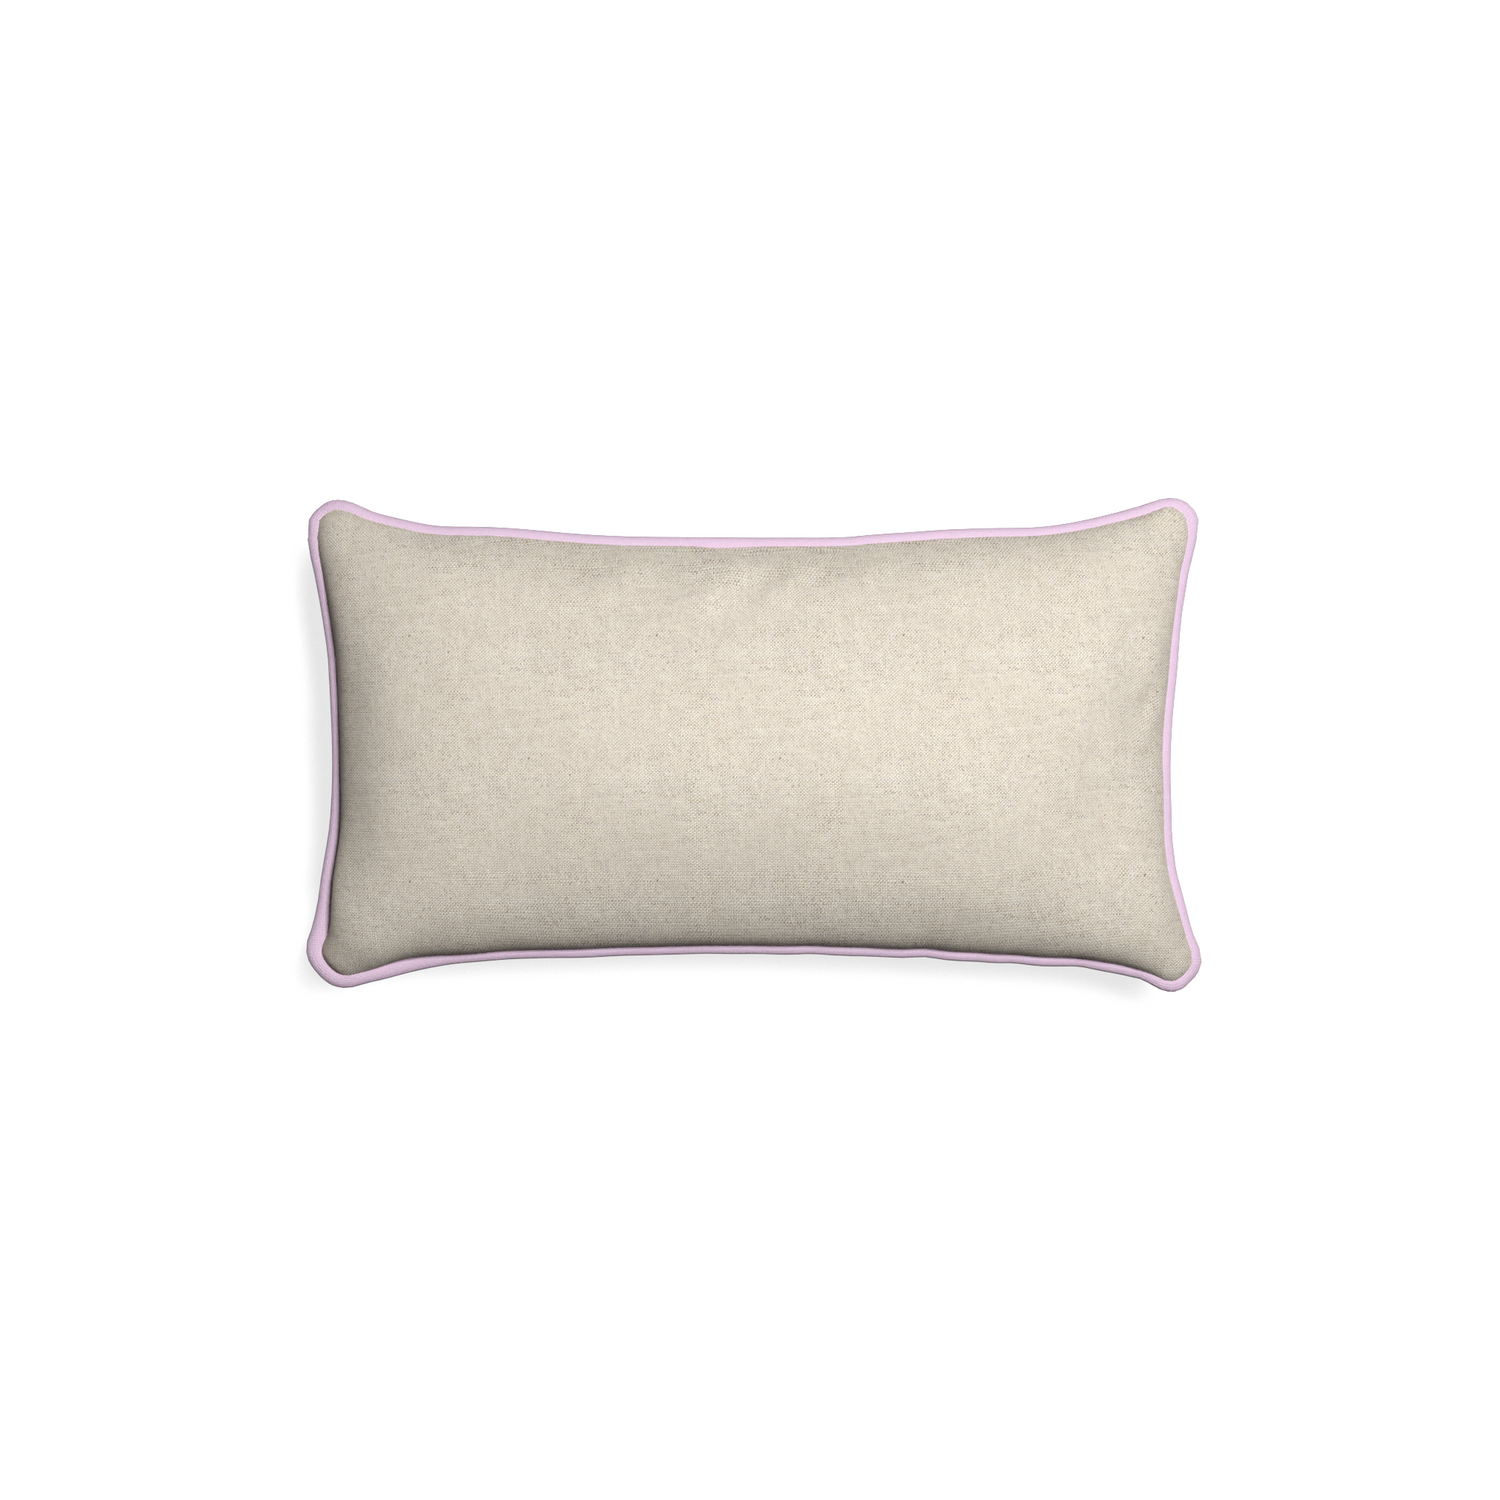 Petite-lumbar oat custom light brownpillow with l piping on white background